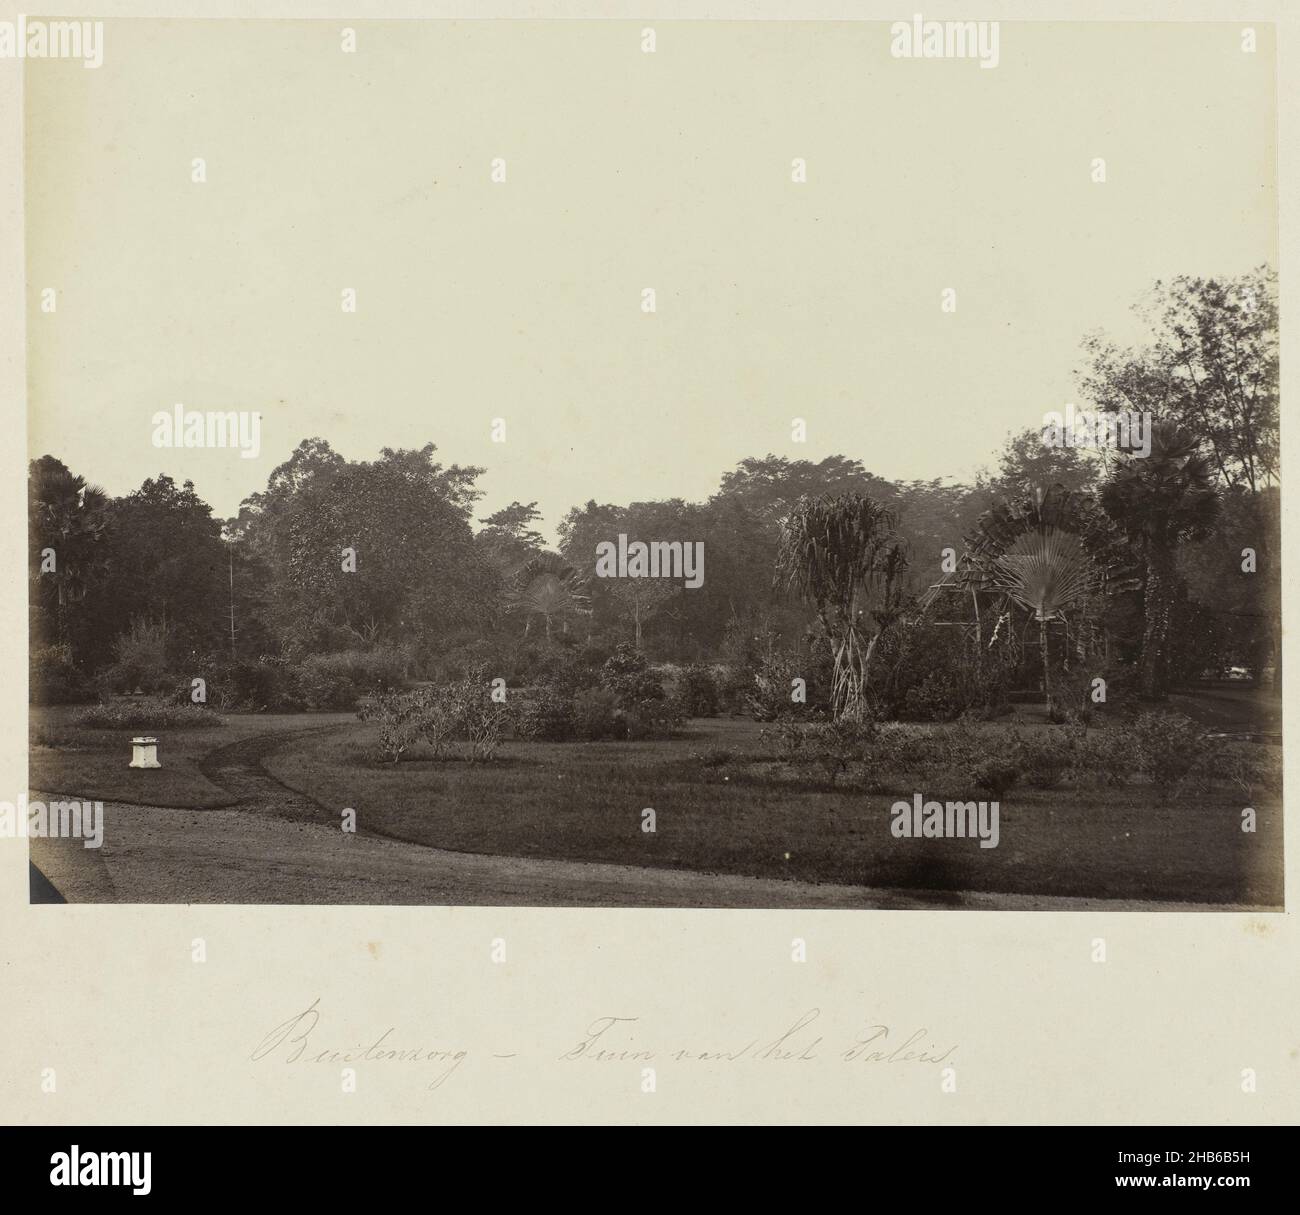 Buitenzorg - Garden of the Palace (title on object), View of the garden of the governor general's palace in Buitenzorg. Part of the green photo album with photos of Java, from the possession of pharmacist Specht-Grijp, who returned to the Netherlands from Batavia in 1865., Woodbury & Page, Buitenzorg, 1863 - 1869, photographic support, albumen print, height 190 mm × width 267 mm Stock Photo